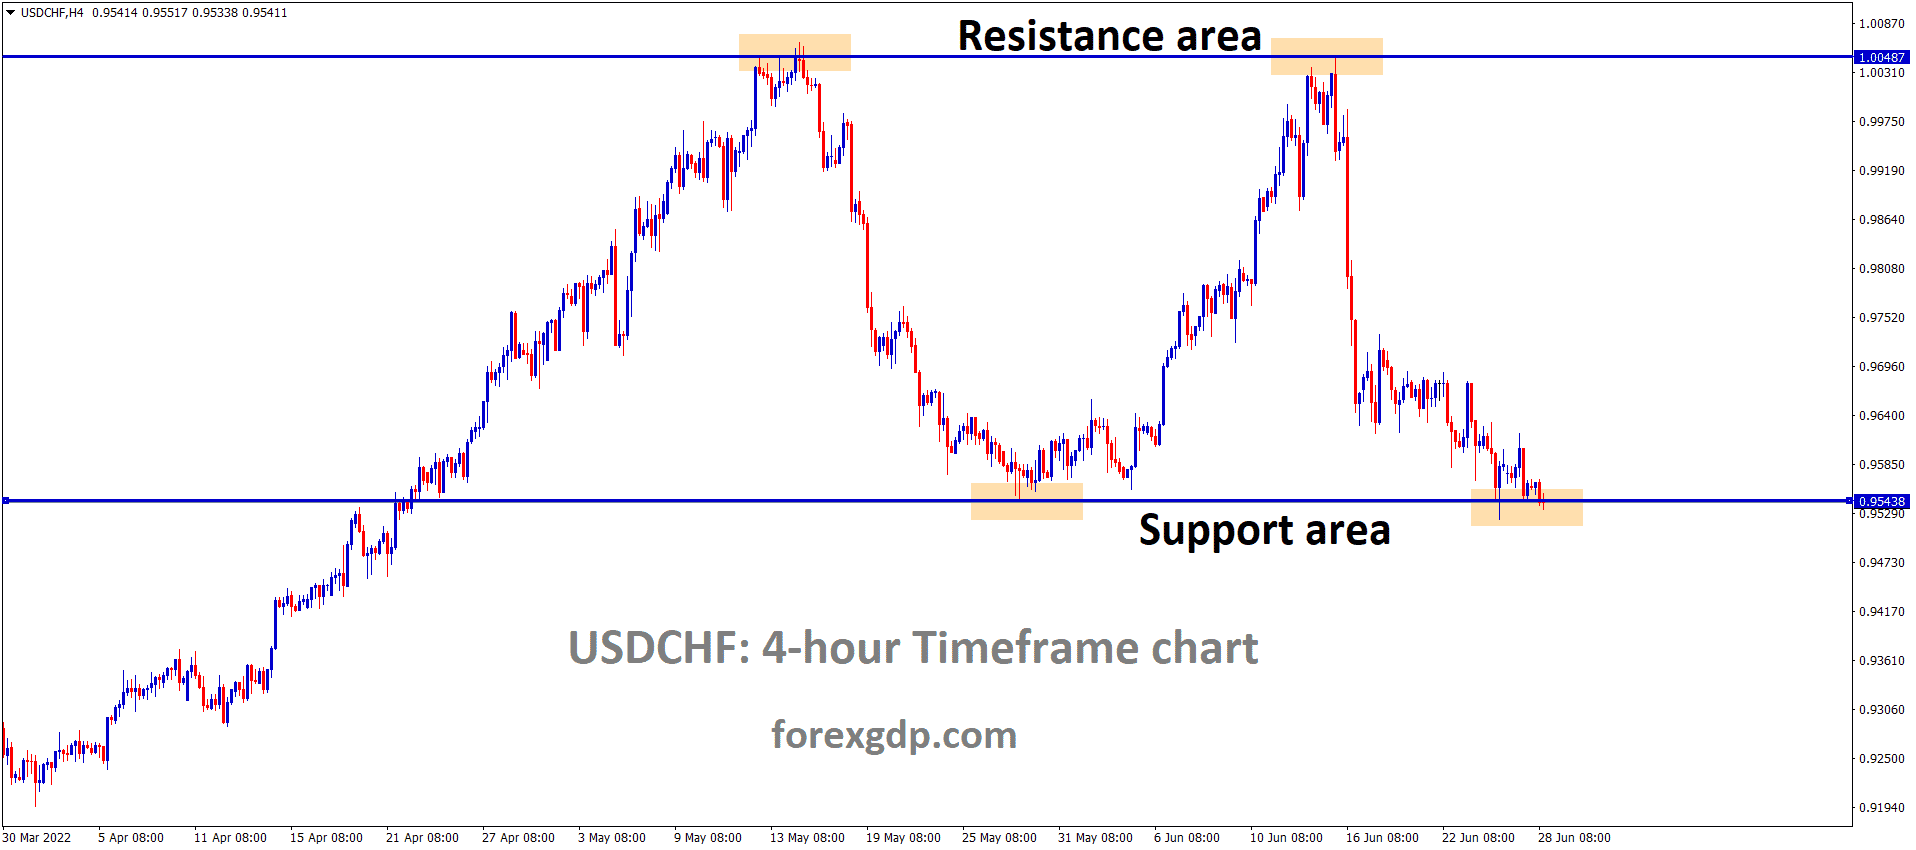 USDCHF is moving in the Box Pattern and the market has reached the Horizontal support area of the Patter.